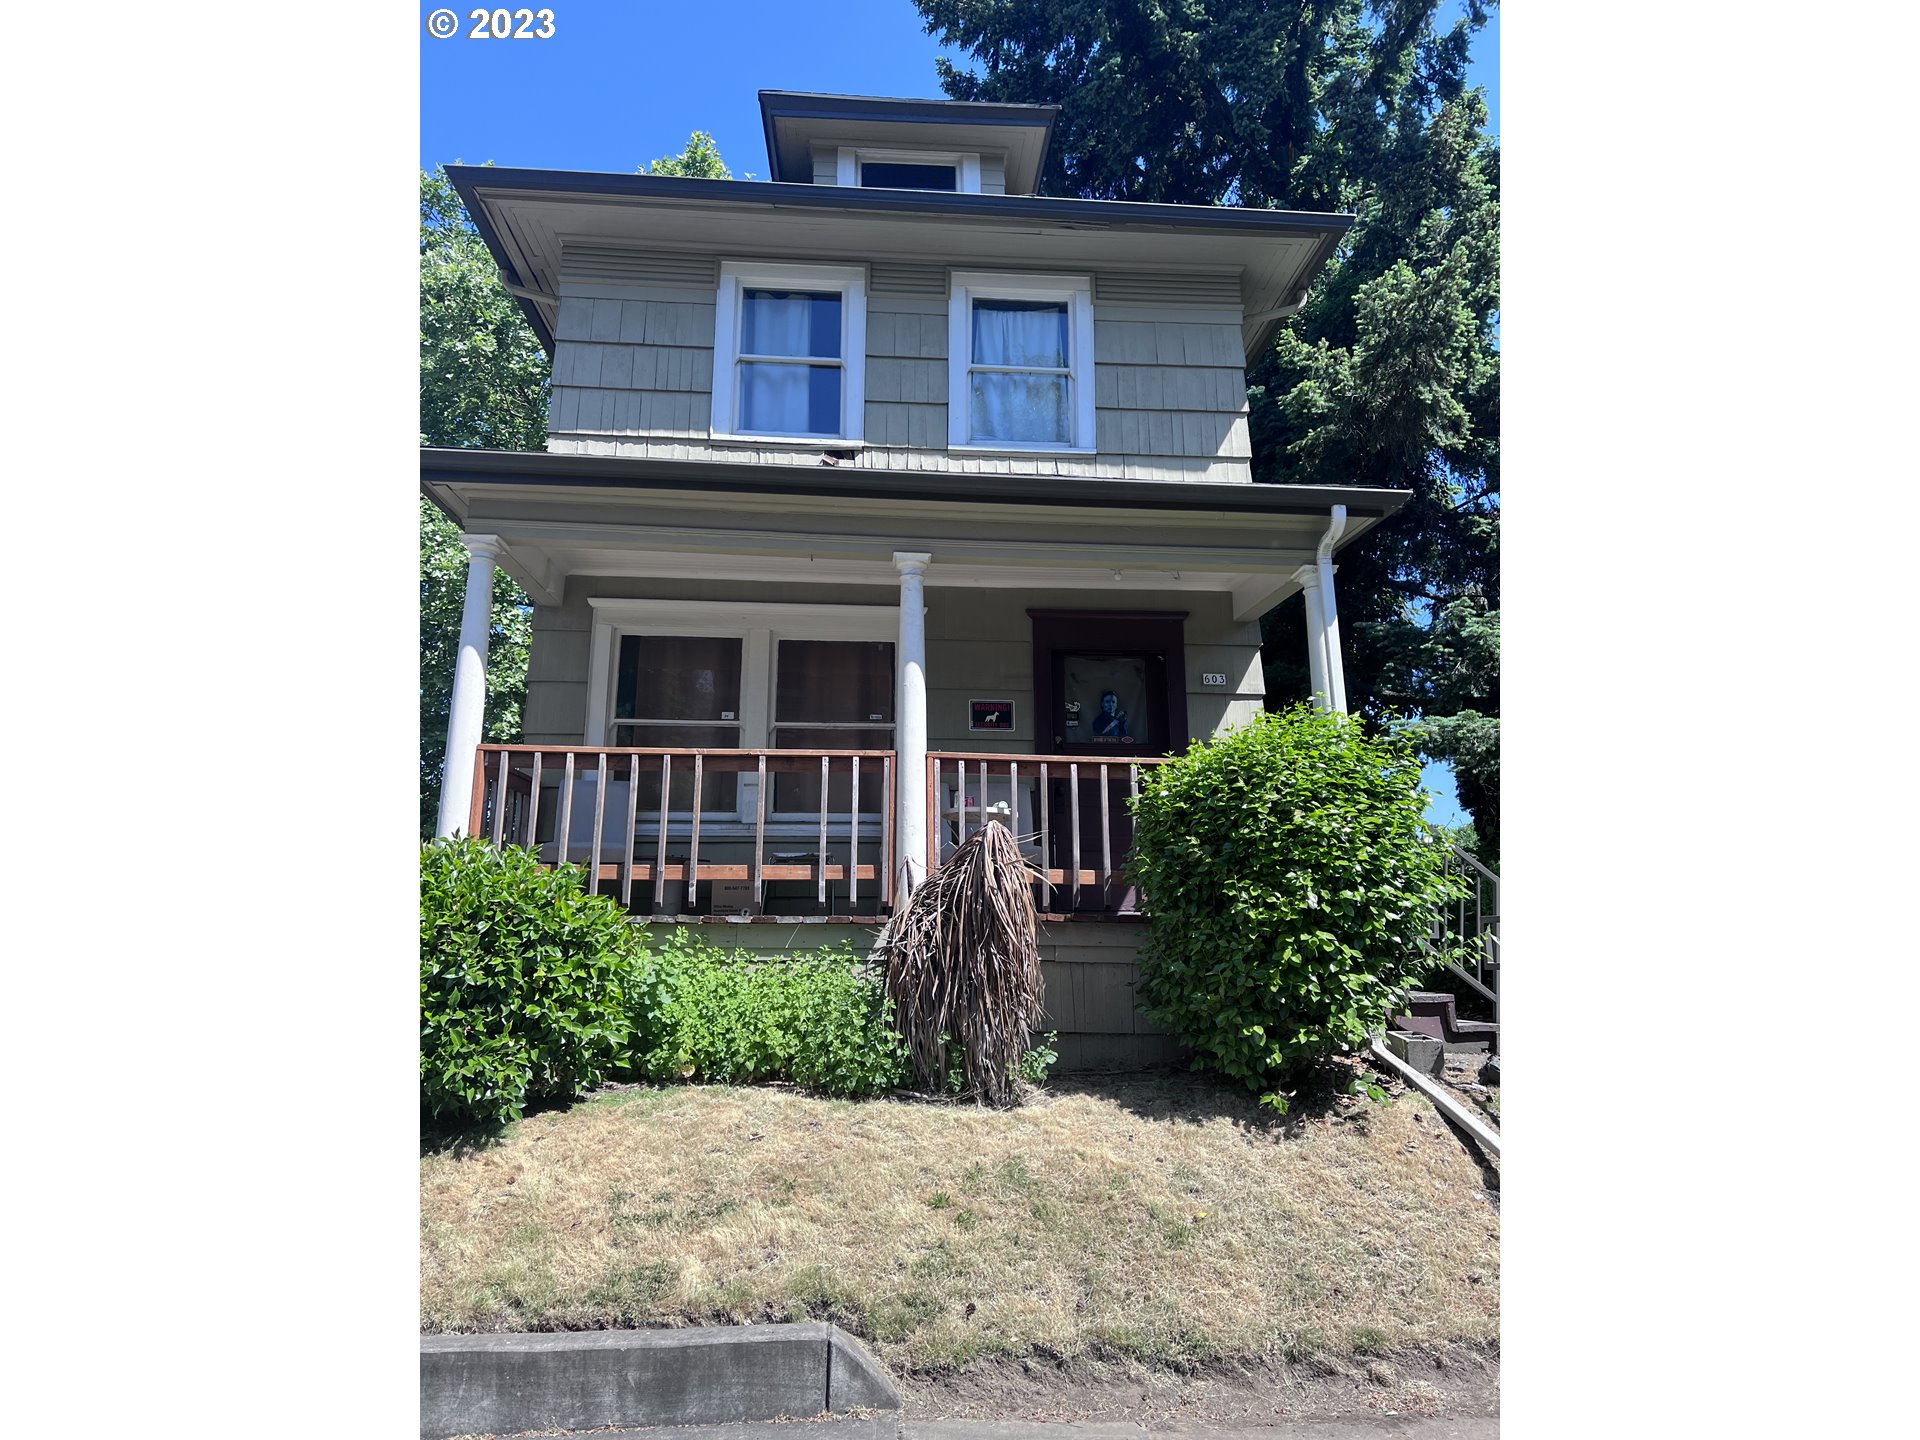 Two parcels included in this purchase. One SFH (603 NE Halsey St) and one lot (617-619 NE Halsey St). SFH is in process of getting remodeled with fresh paint, new engineered hardwoods throughout, new kitchen cabinets and countertops. To be completed by 10/5 and new photos coming soon.